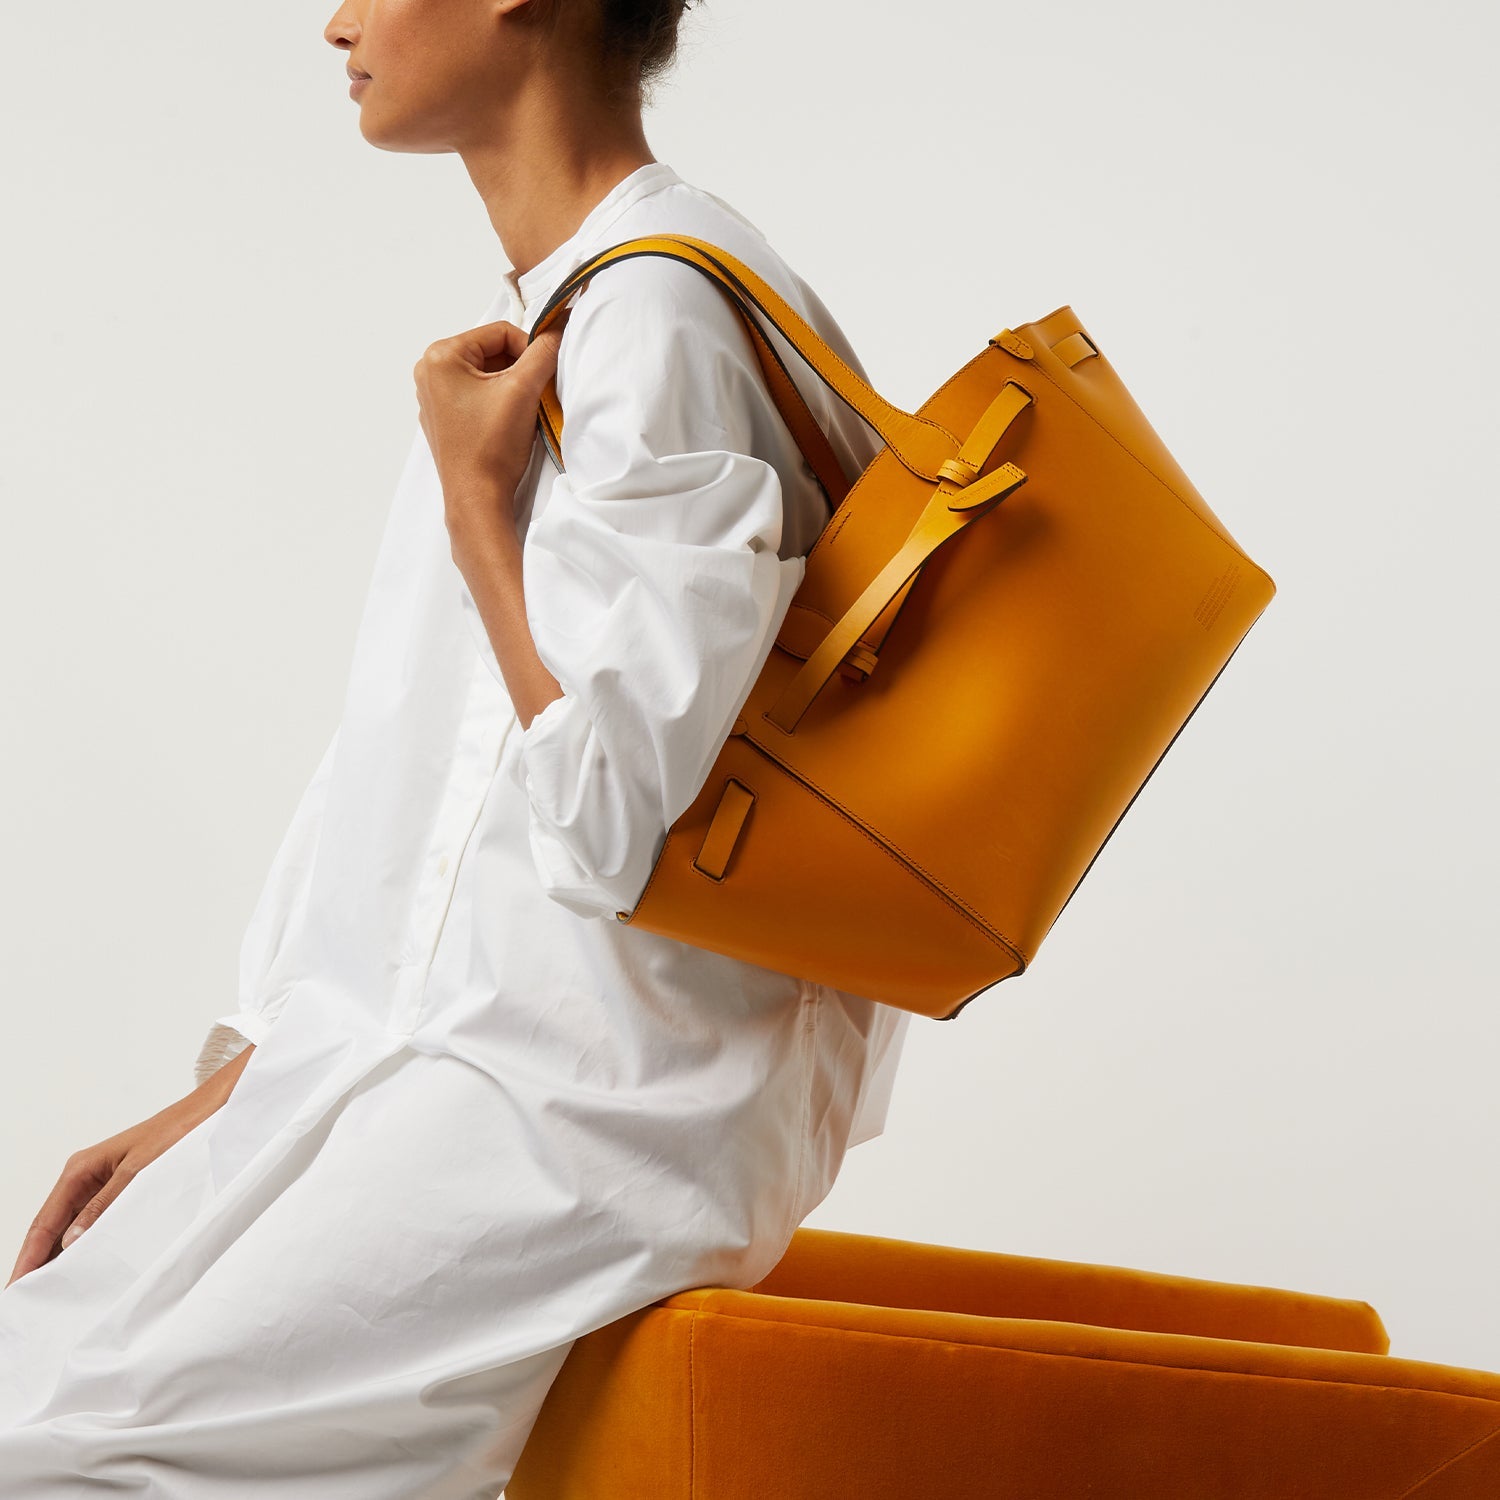 Return to Nature Tote Small -

                  
                    Compostable Leather in Honey -
                  

                  Anya Hindmarch US
